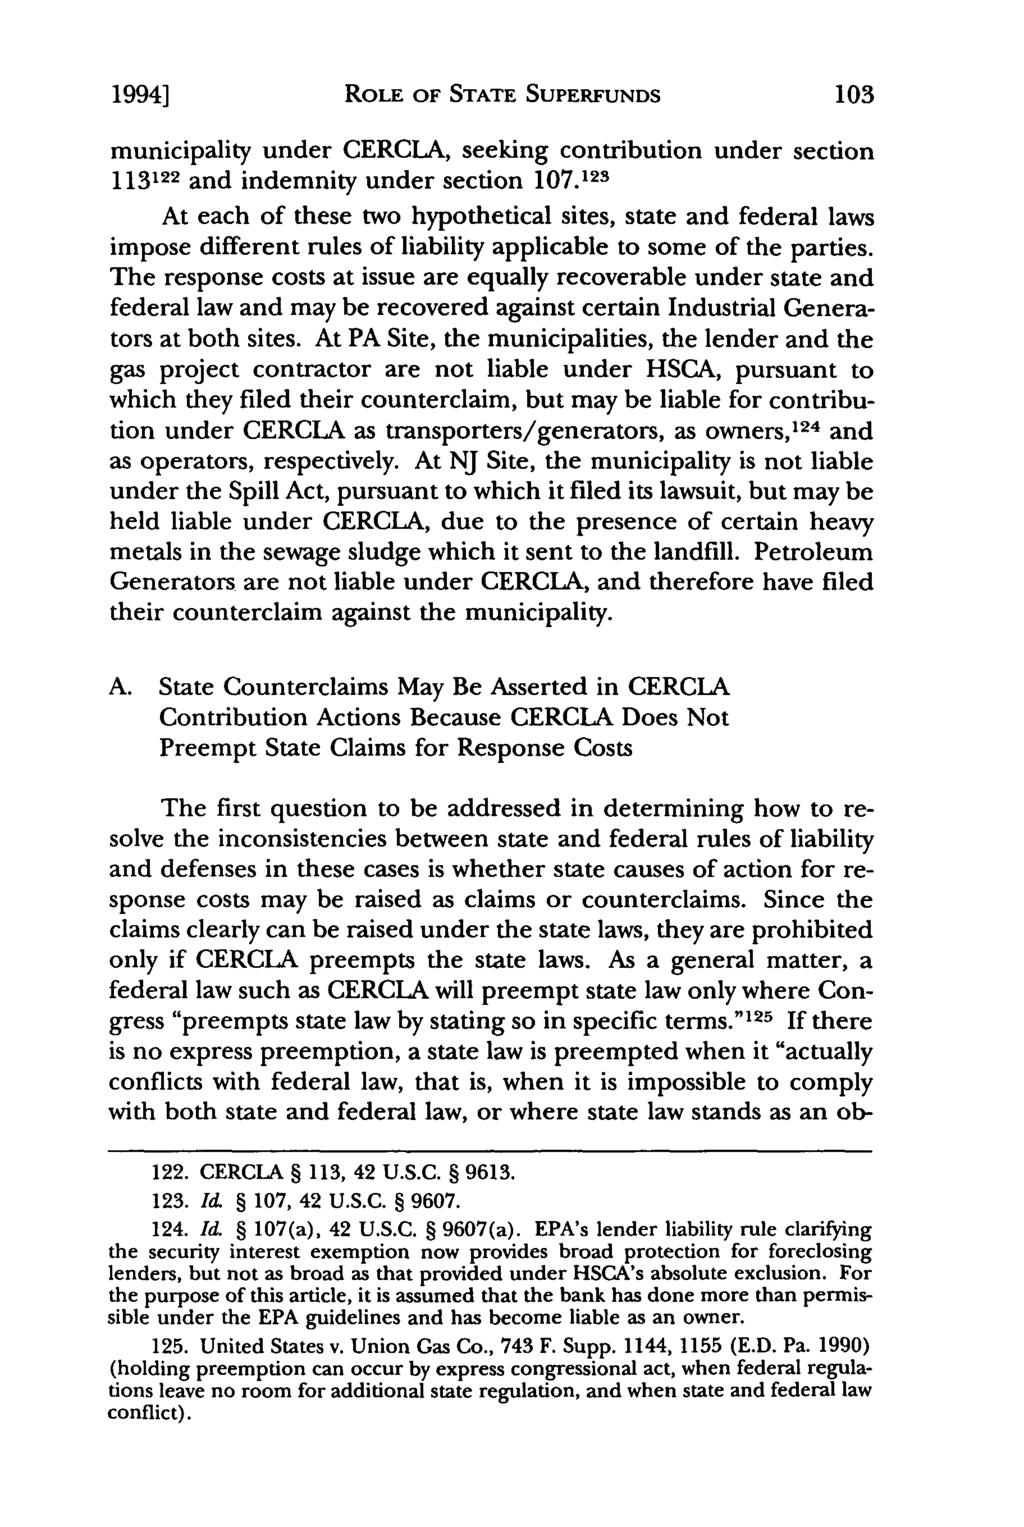 1994] McKinstry: The Role of State Little Superfunds in Allocation and Indemnity A ROLE OF STATE SUPERFUNDS municipality under CERCLA, seeking contribution under section 113122 and indemnity under